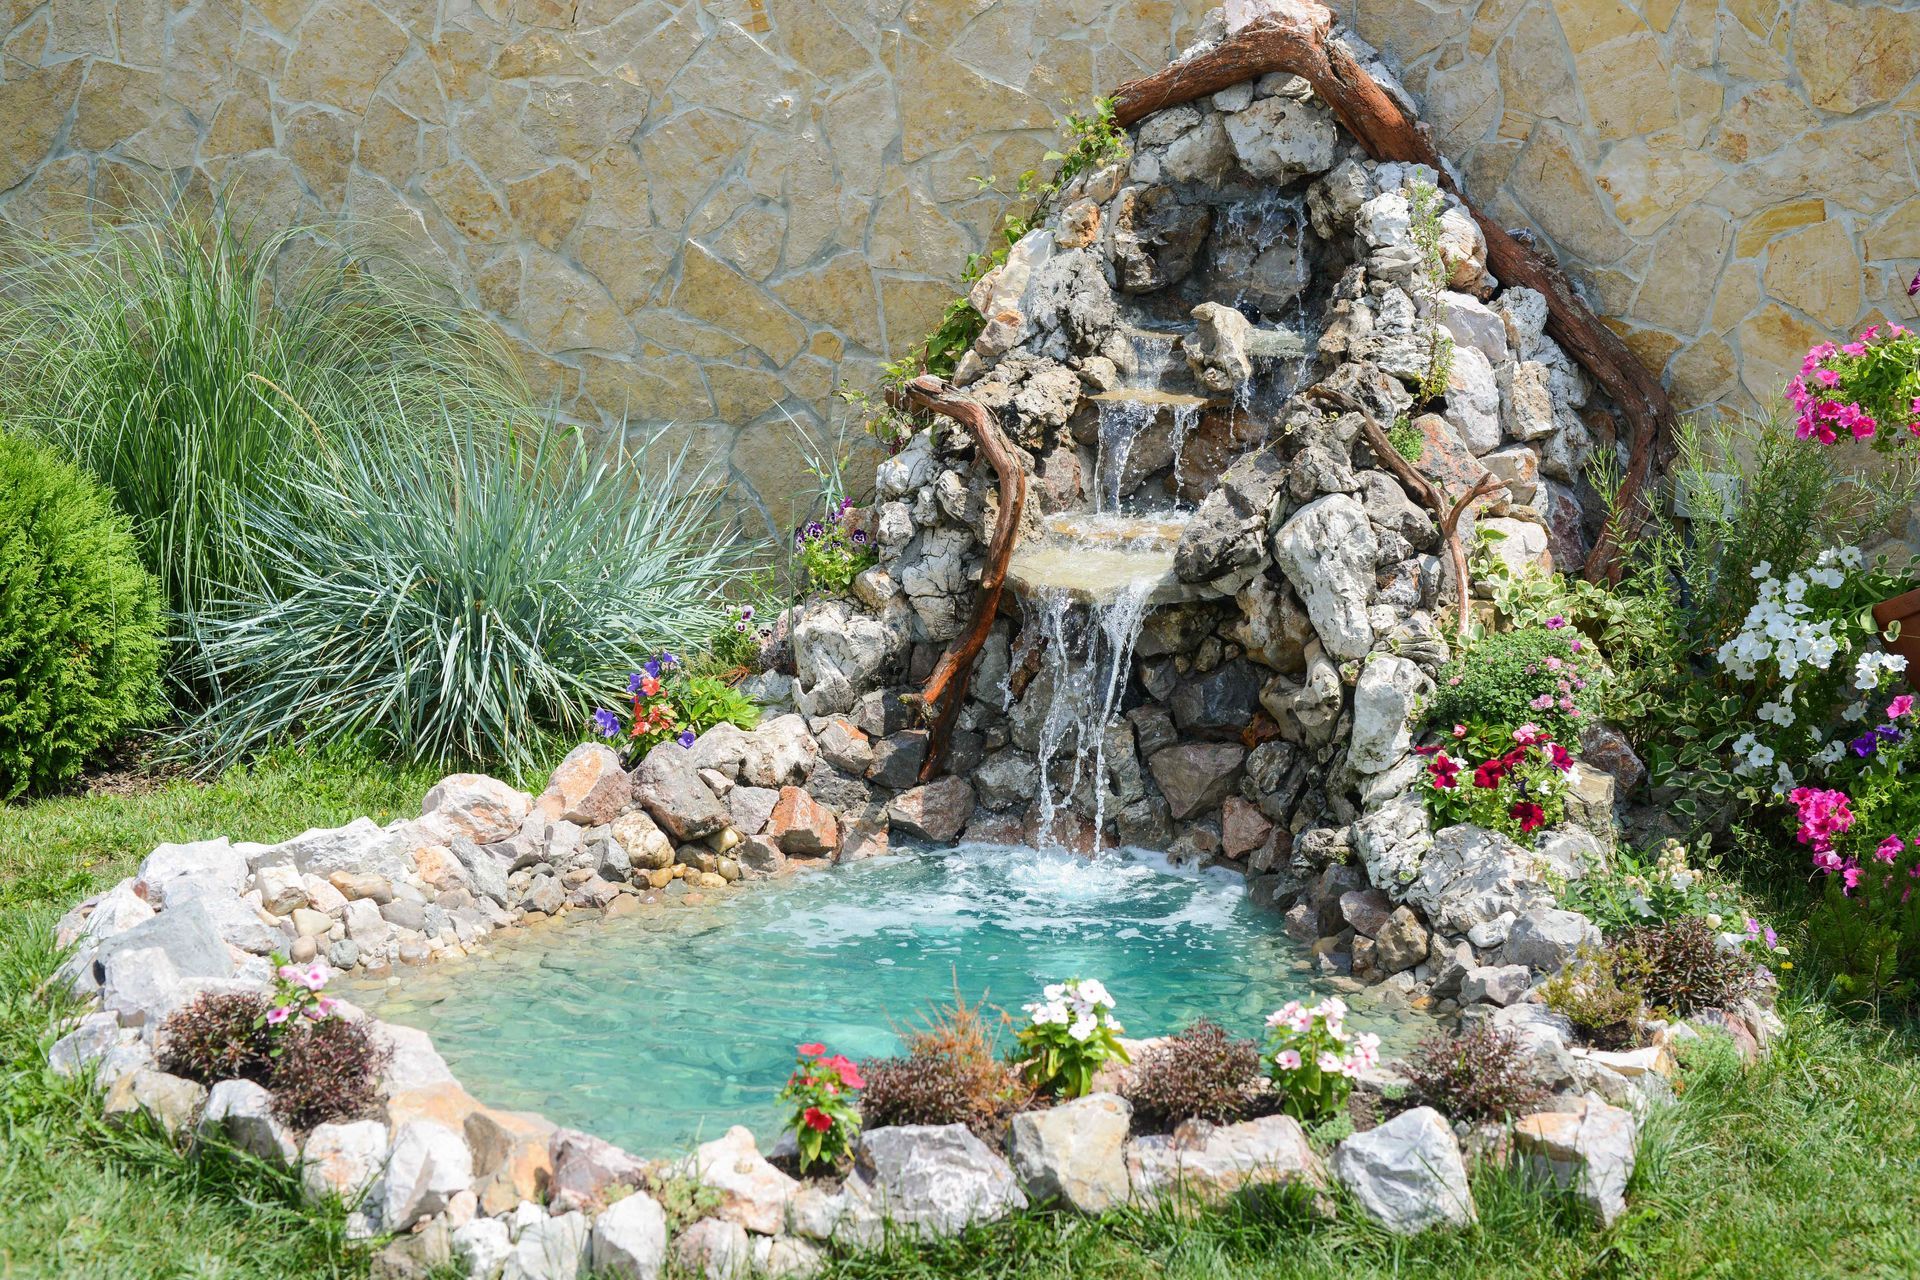 A Waterfall Flowing Into a Pool, The Entire Water Feature Is Built Out Of Stones